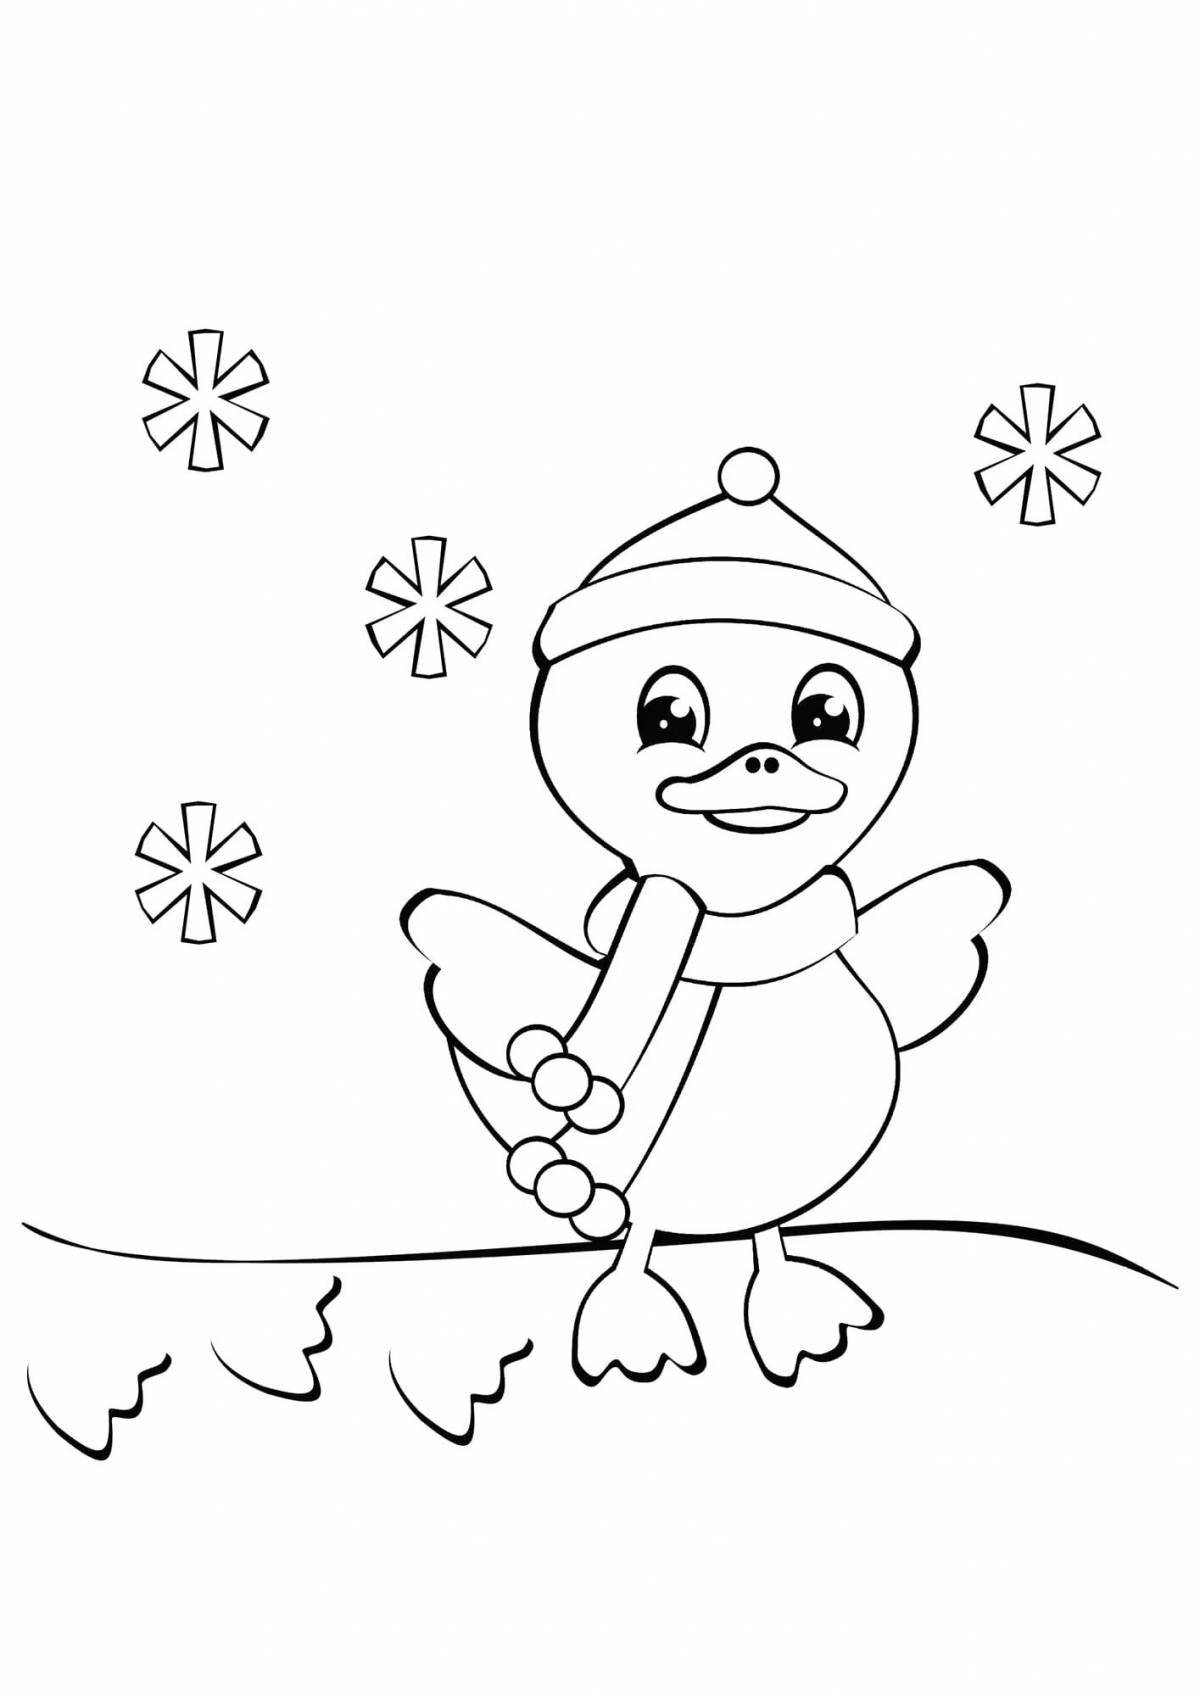 Fun coloring book winter for children 4 years old